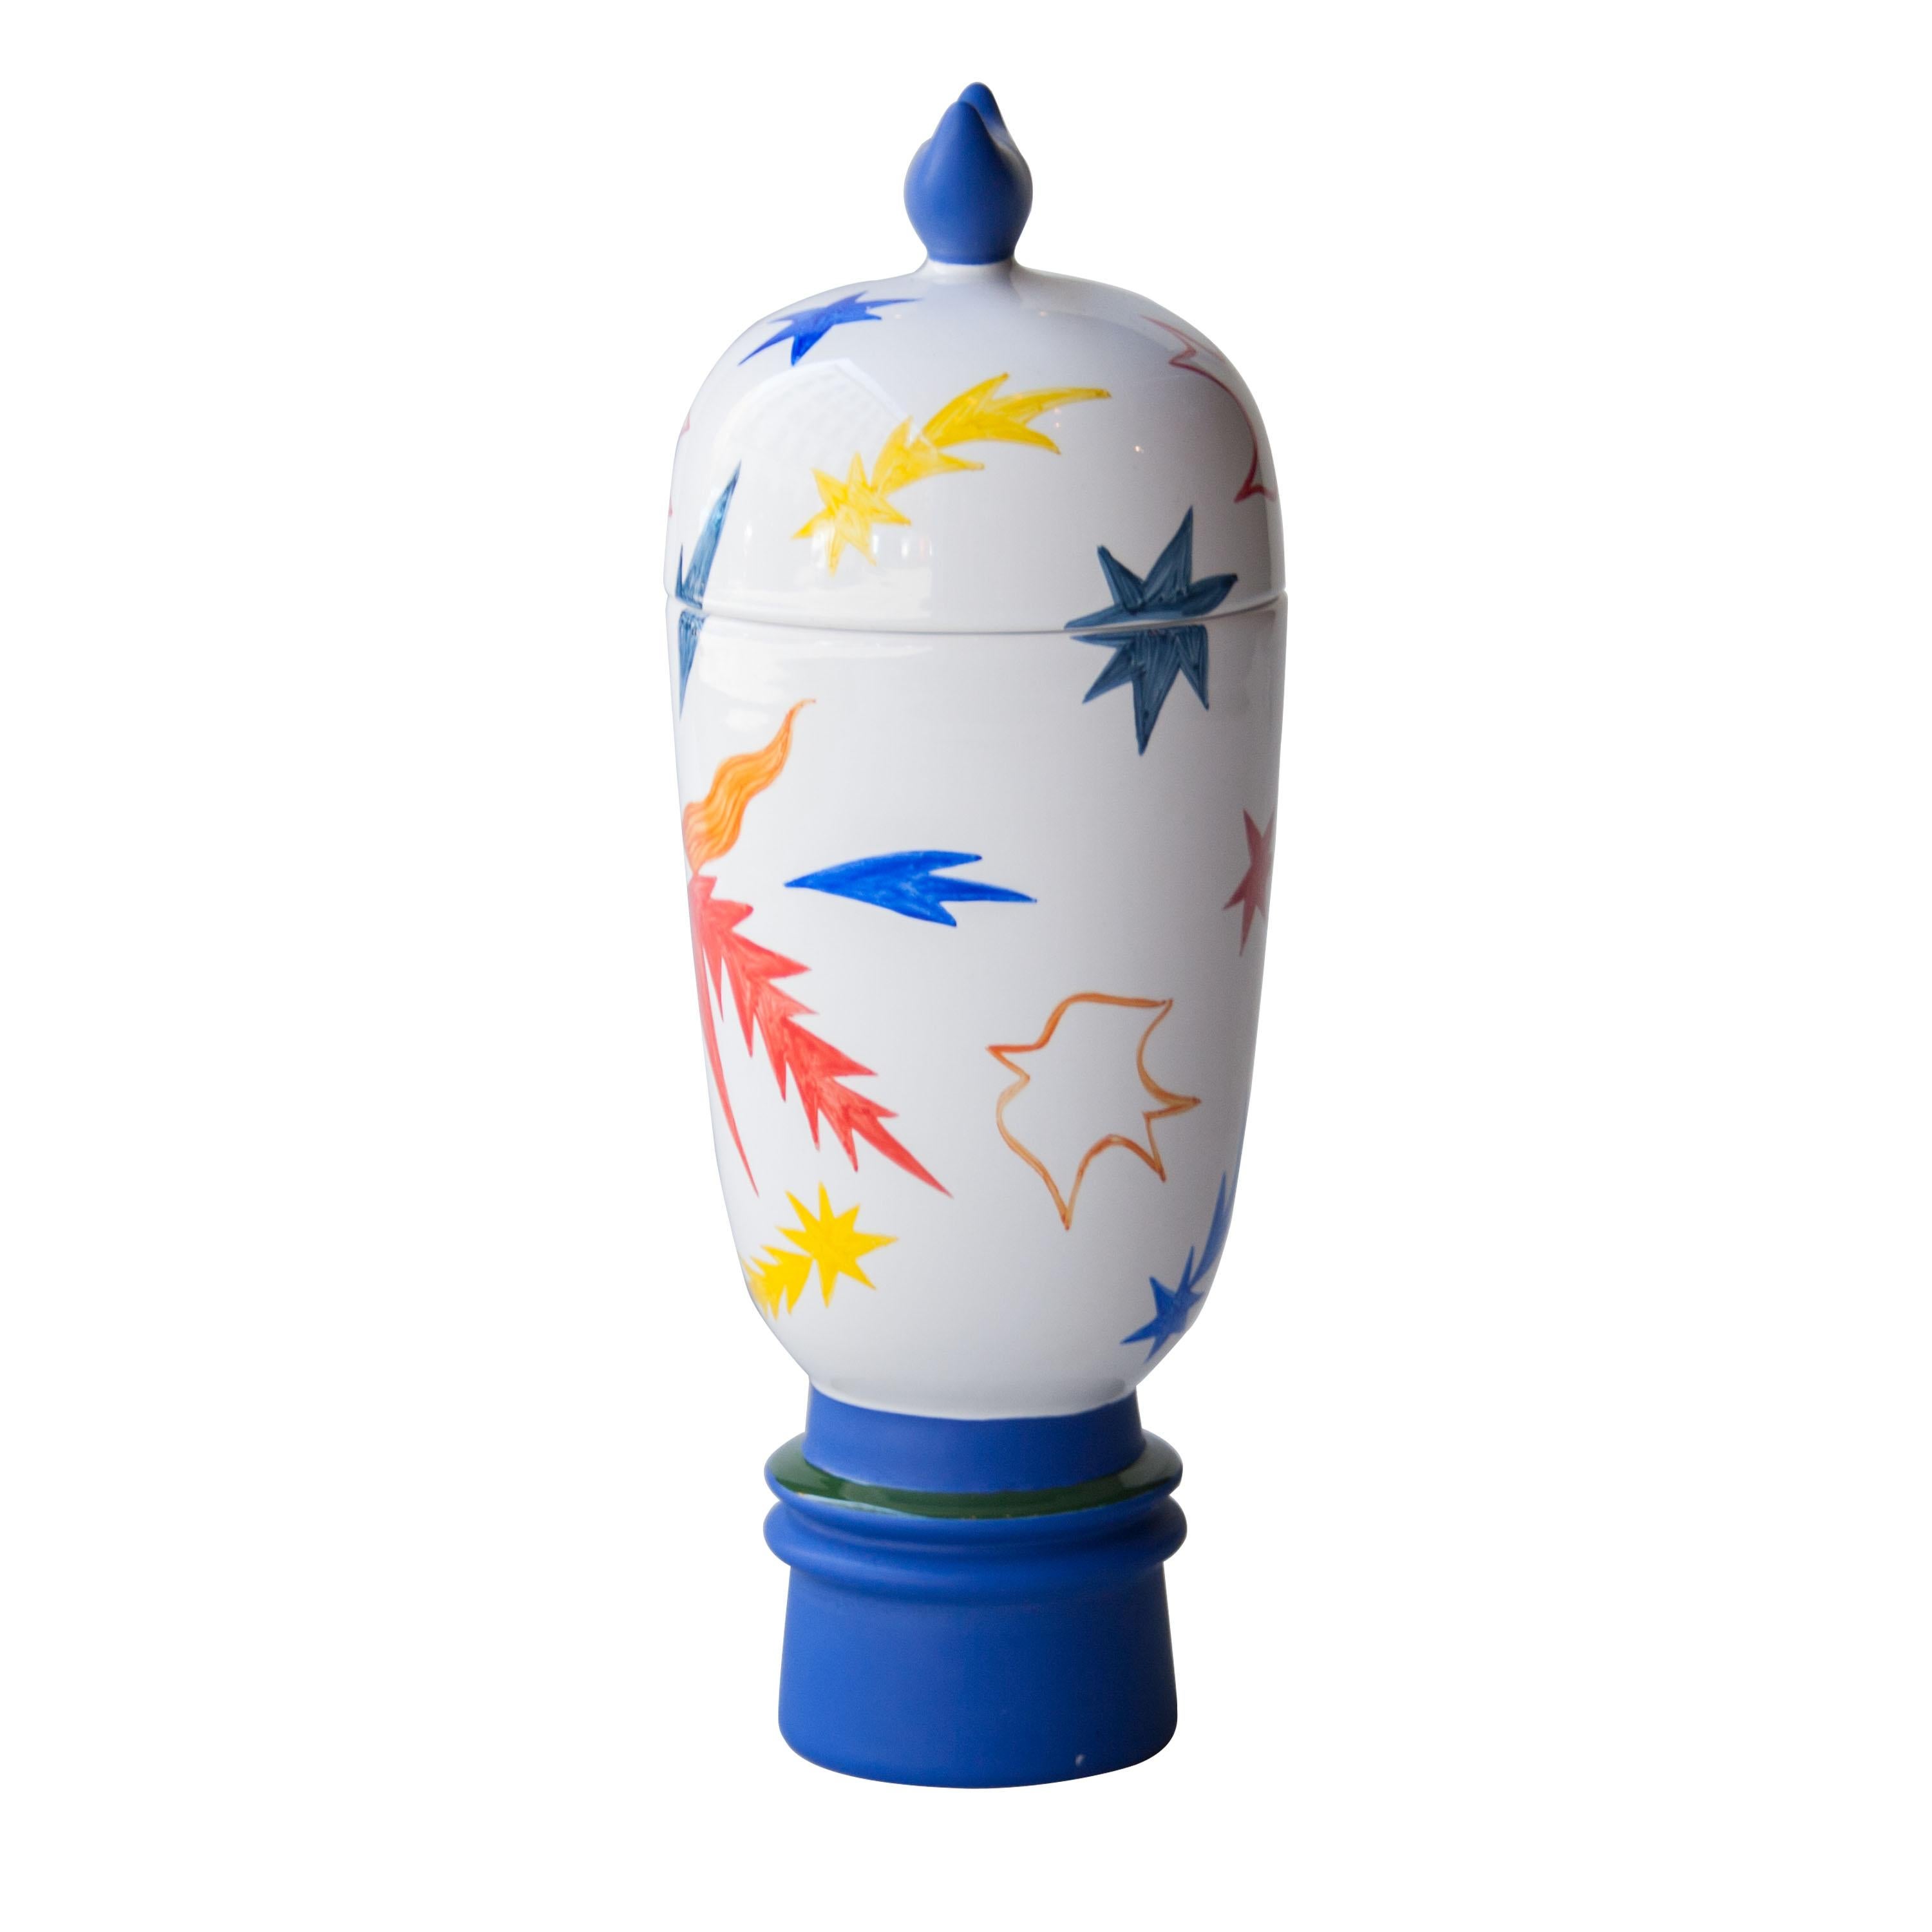 The handcrafted vase comes in white and a matte Klein blue color with star and different pattern. The lid on top features a blue Klein horn-shaped handle.

This product has made by humans and not machines. Small imperfections, differences may